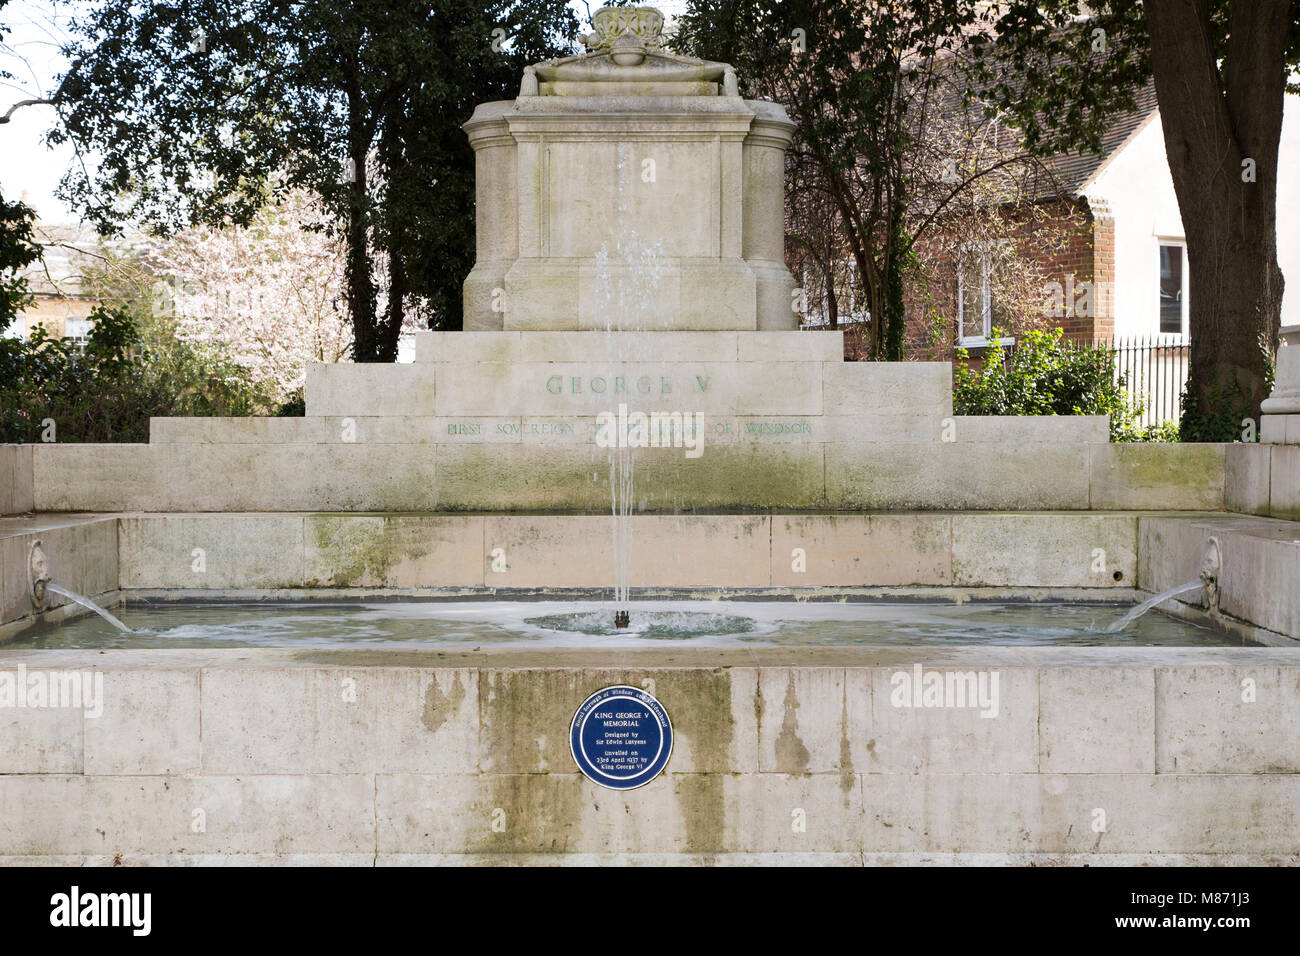 The George V Memorial Fountain in Windsor, England. The fountain was designed by Sir Edwin Lutyens and was unveiled by King George VI on 23 April 1937 Stock Photo